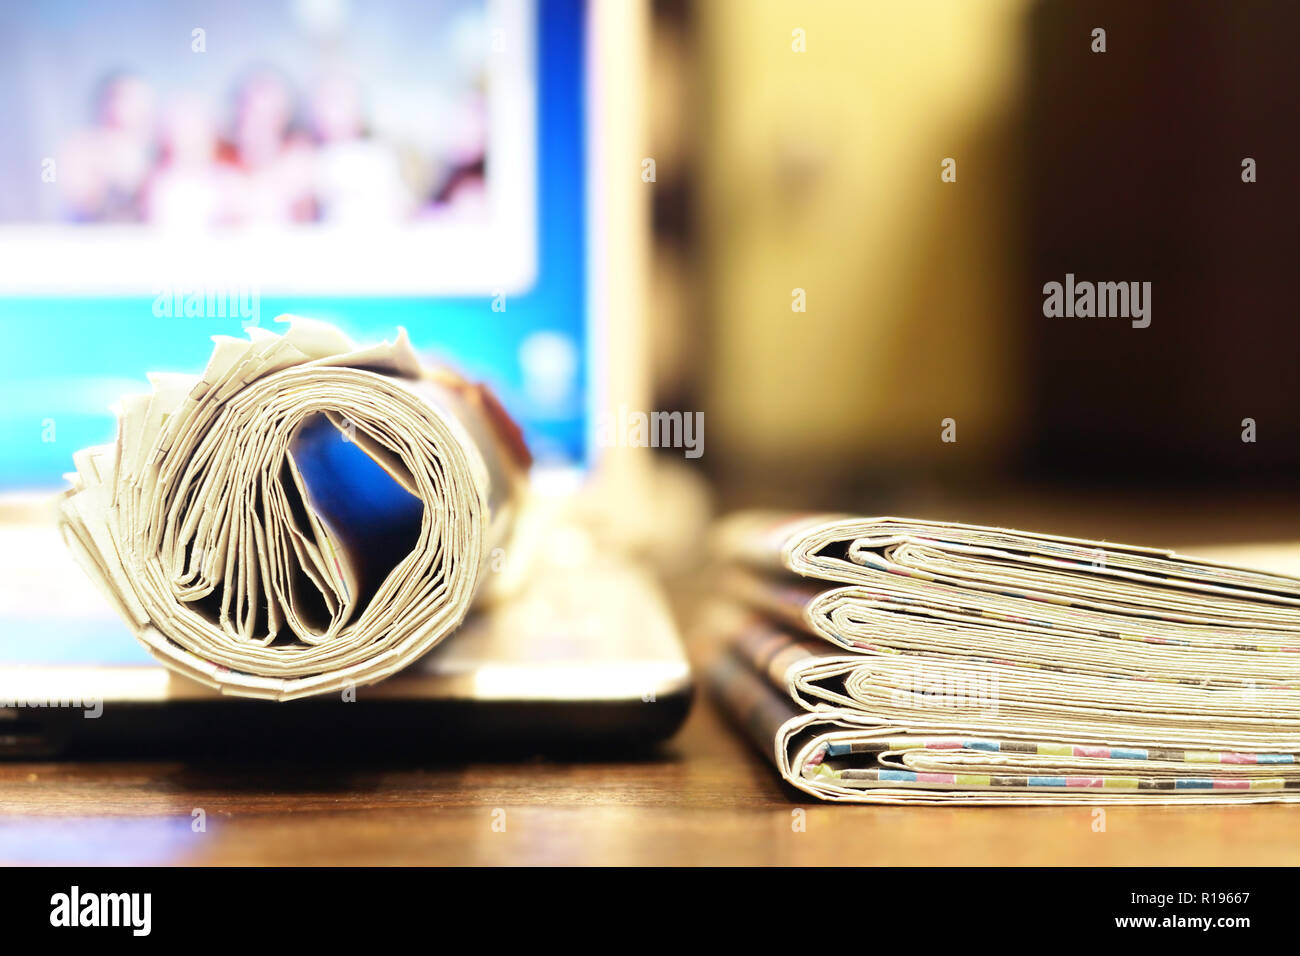 Stack of newspapers and laptop. Journals with news and computer. Papers with headlines, articles and screen. Different sources of information Stock Photo